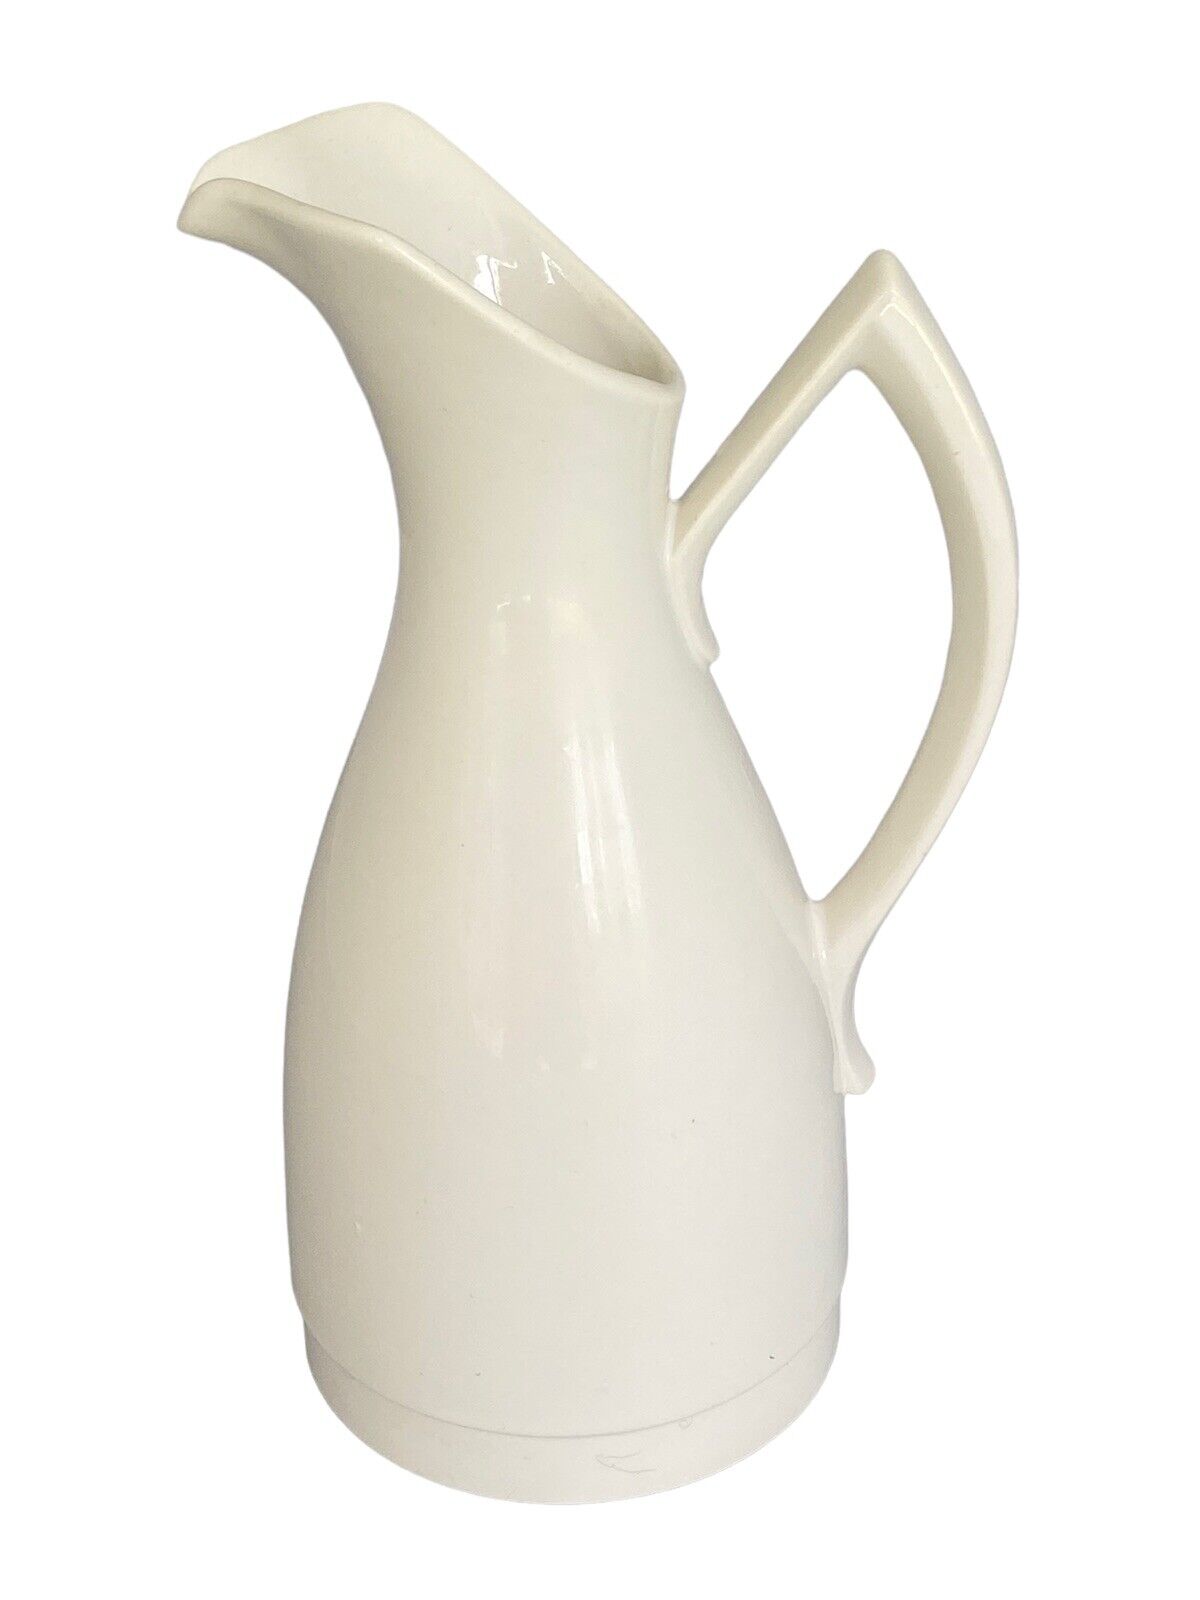 1957 White Carafe /Pitcher ￼Art Deco Style By Homer Laughlin “Kenilworth” Design